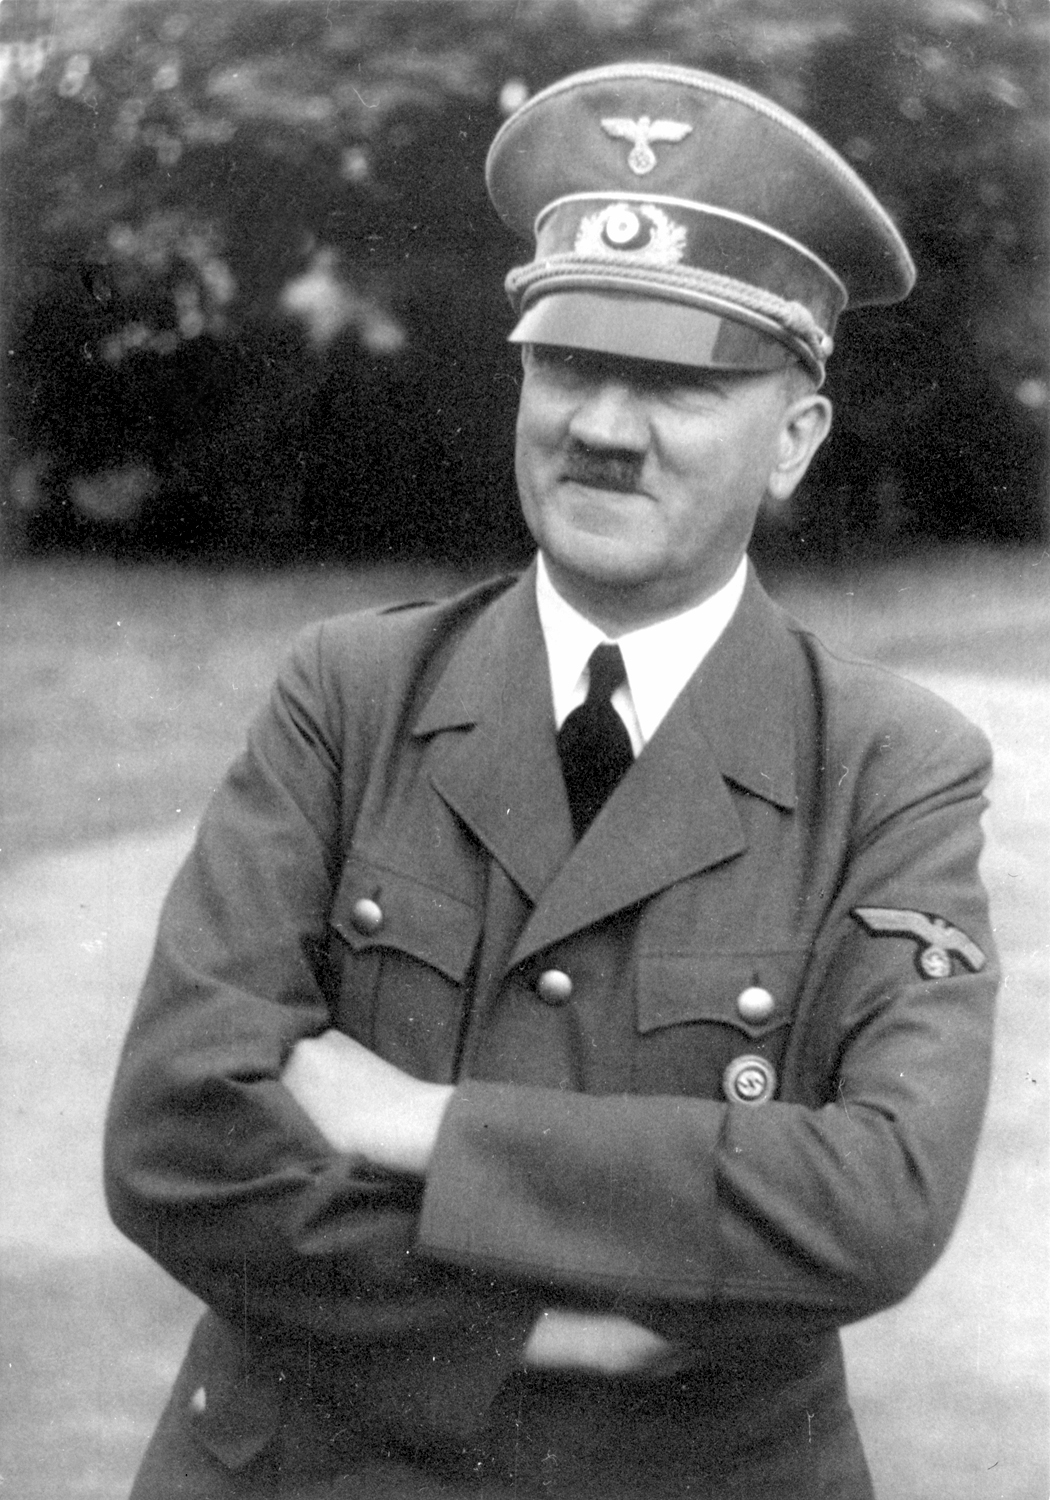 Adolf Hitler in Führerhauptquartier Wolfsschlucht at the end of the campaign against France, from Eva Braun's albums